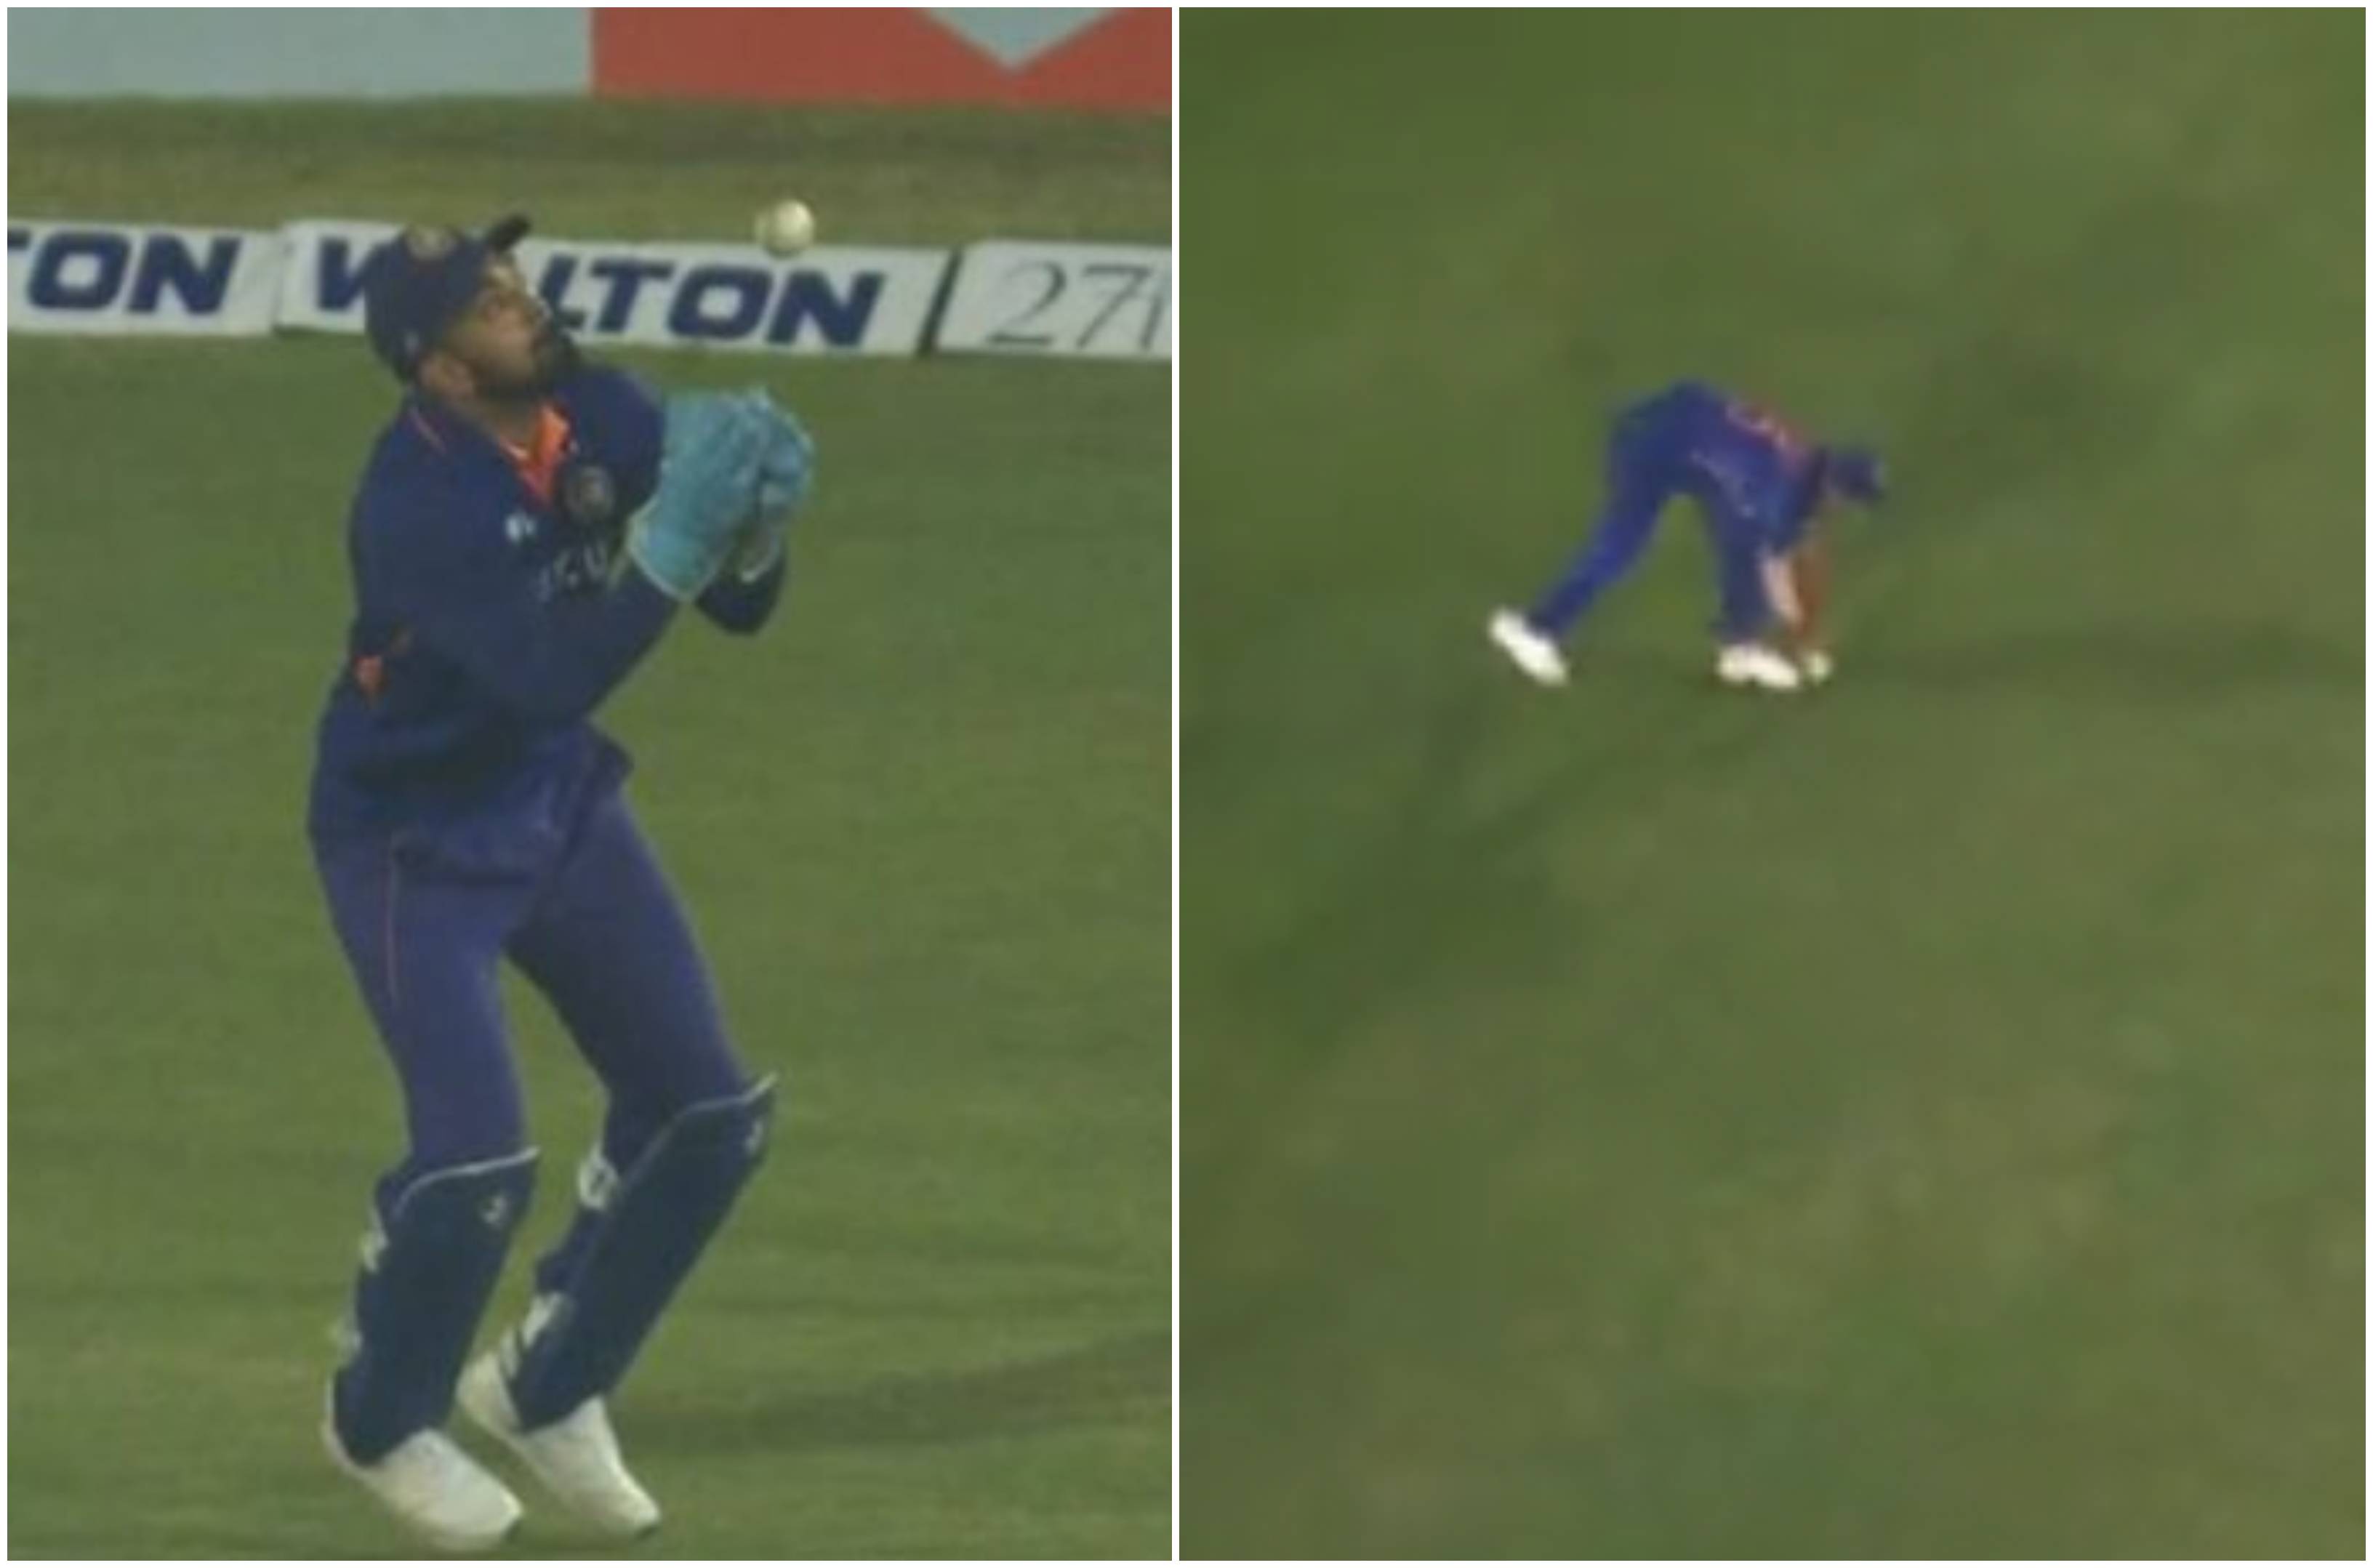 India's fielding wasn't up to the mark | Screengrab